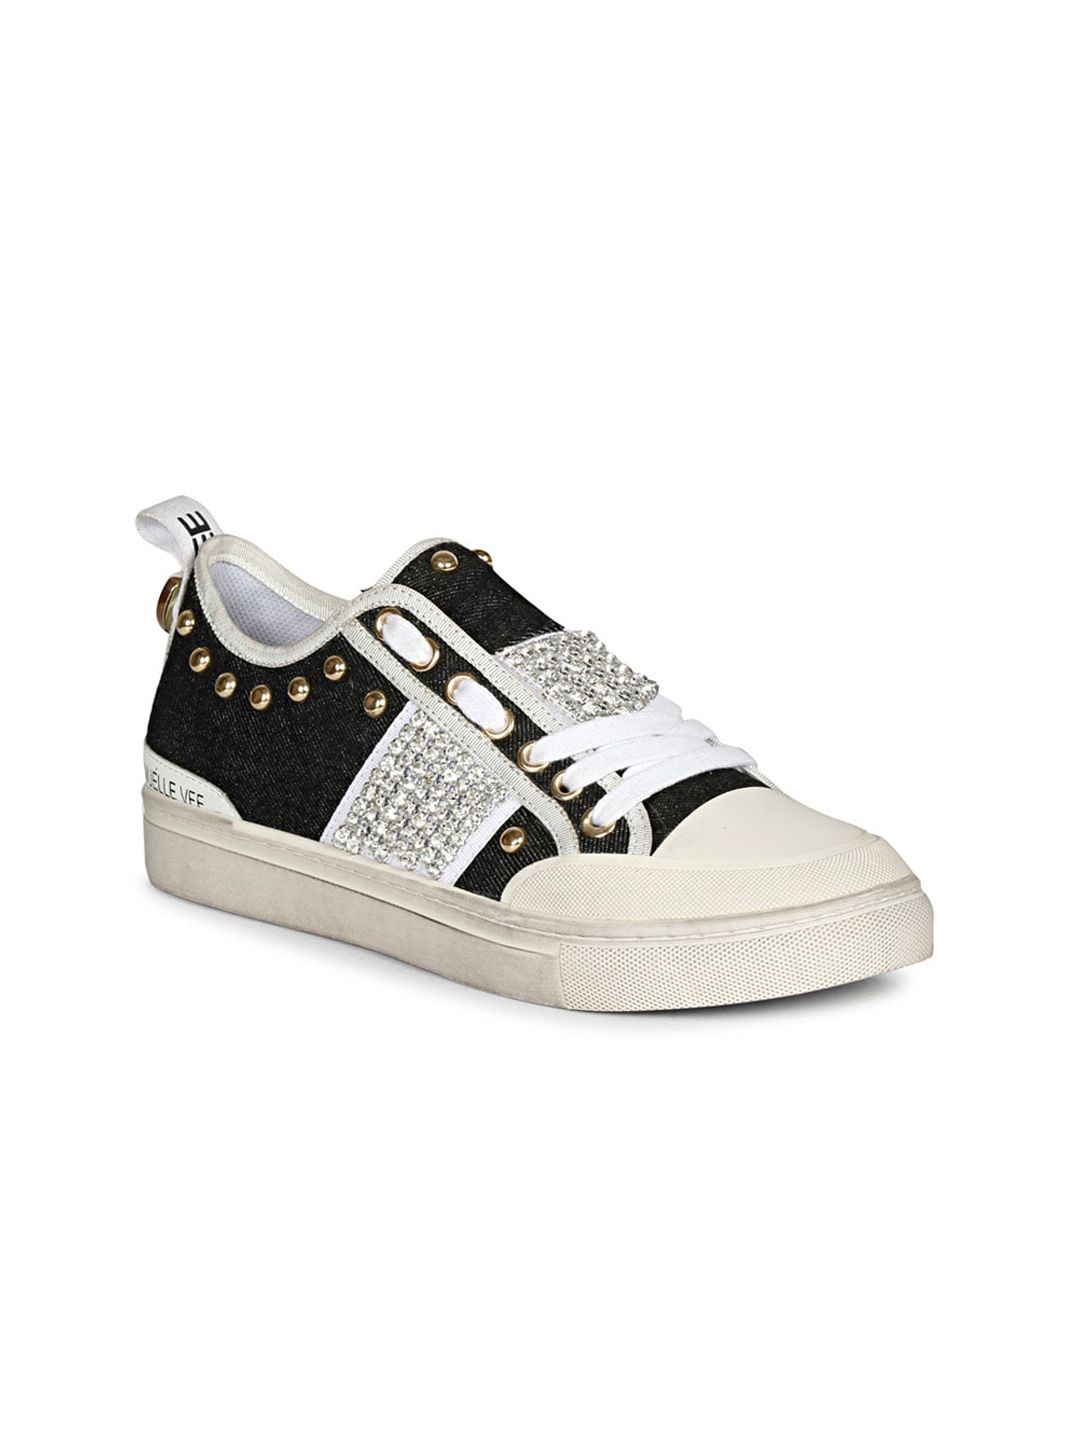 Saint G Women Colourblocked Embellished Leather Sneakers Price in India